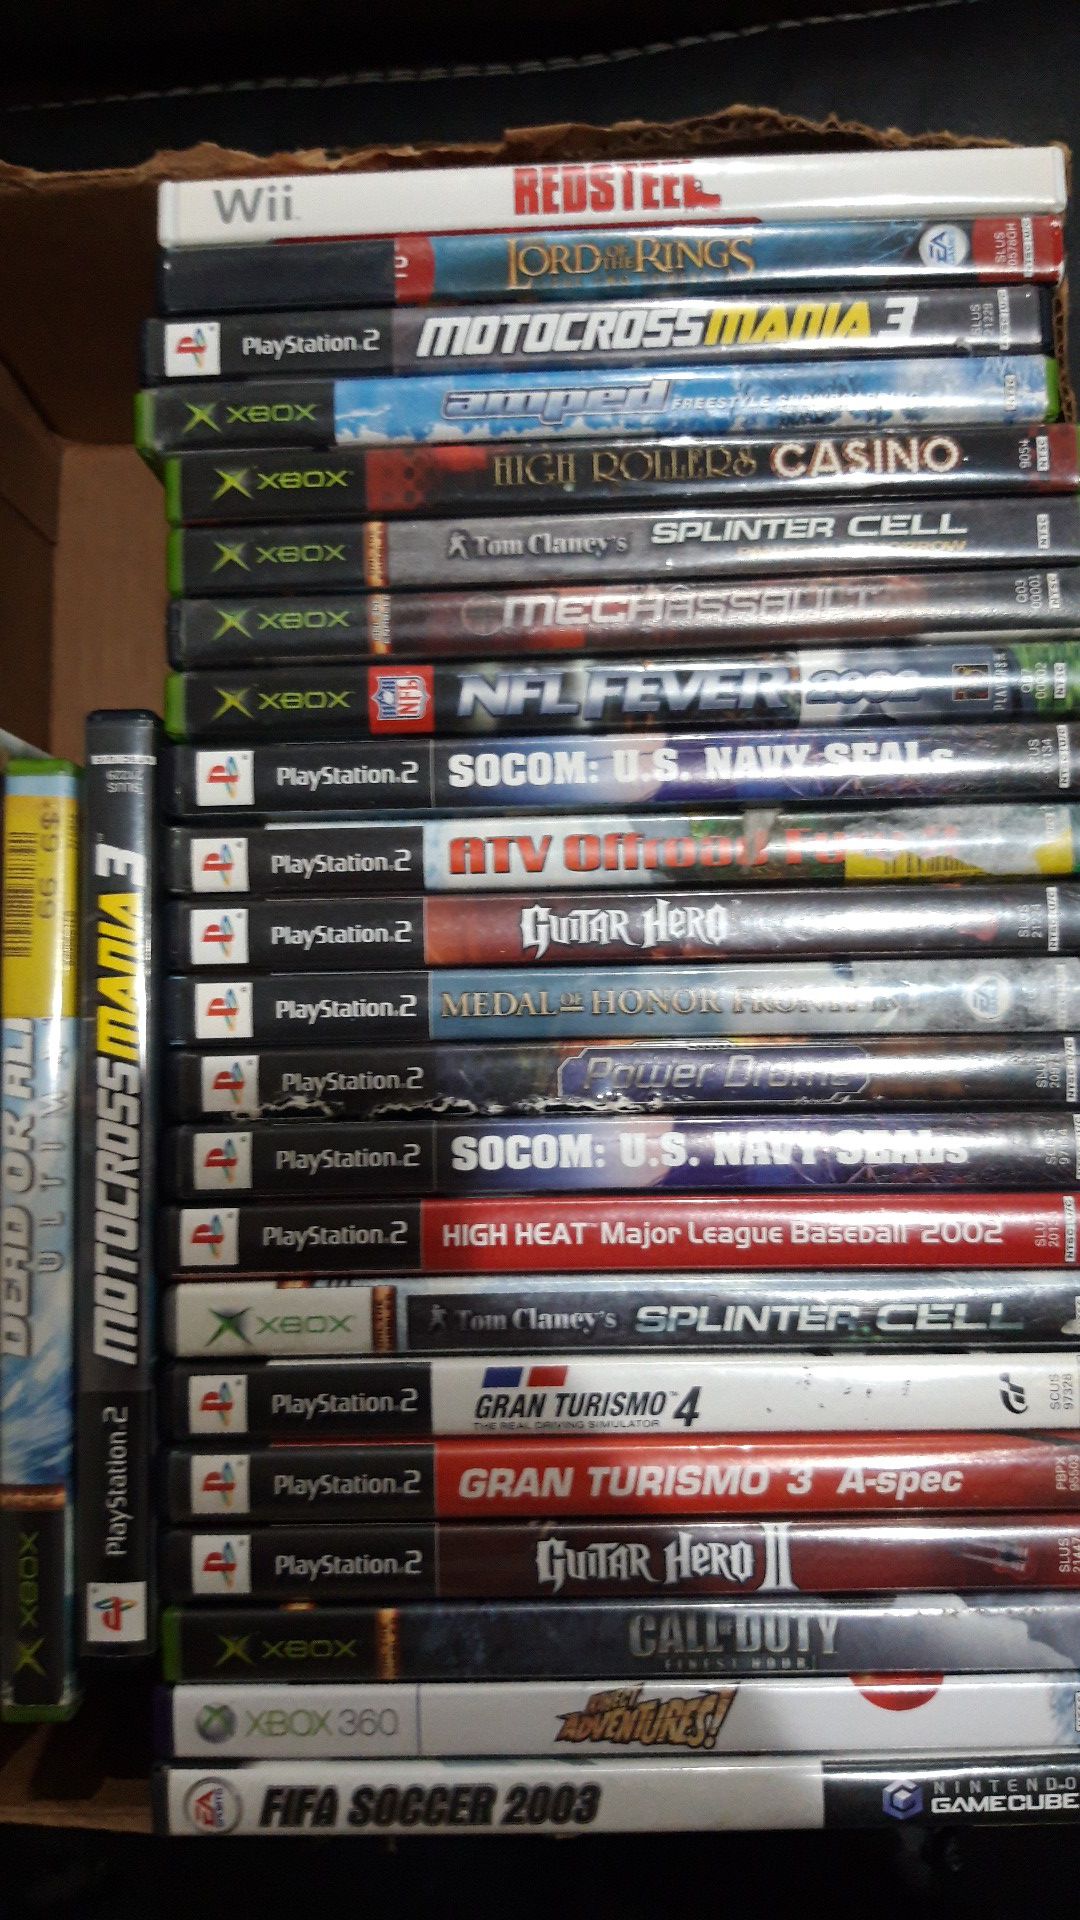 25 games - xbox 360, PS2, and Wii